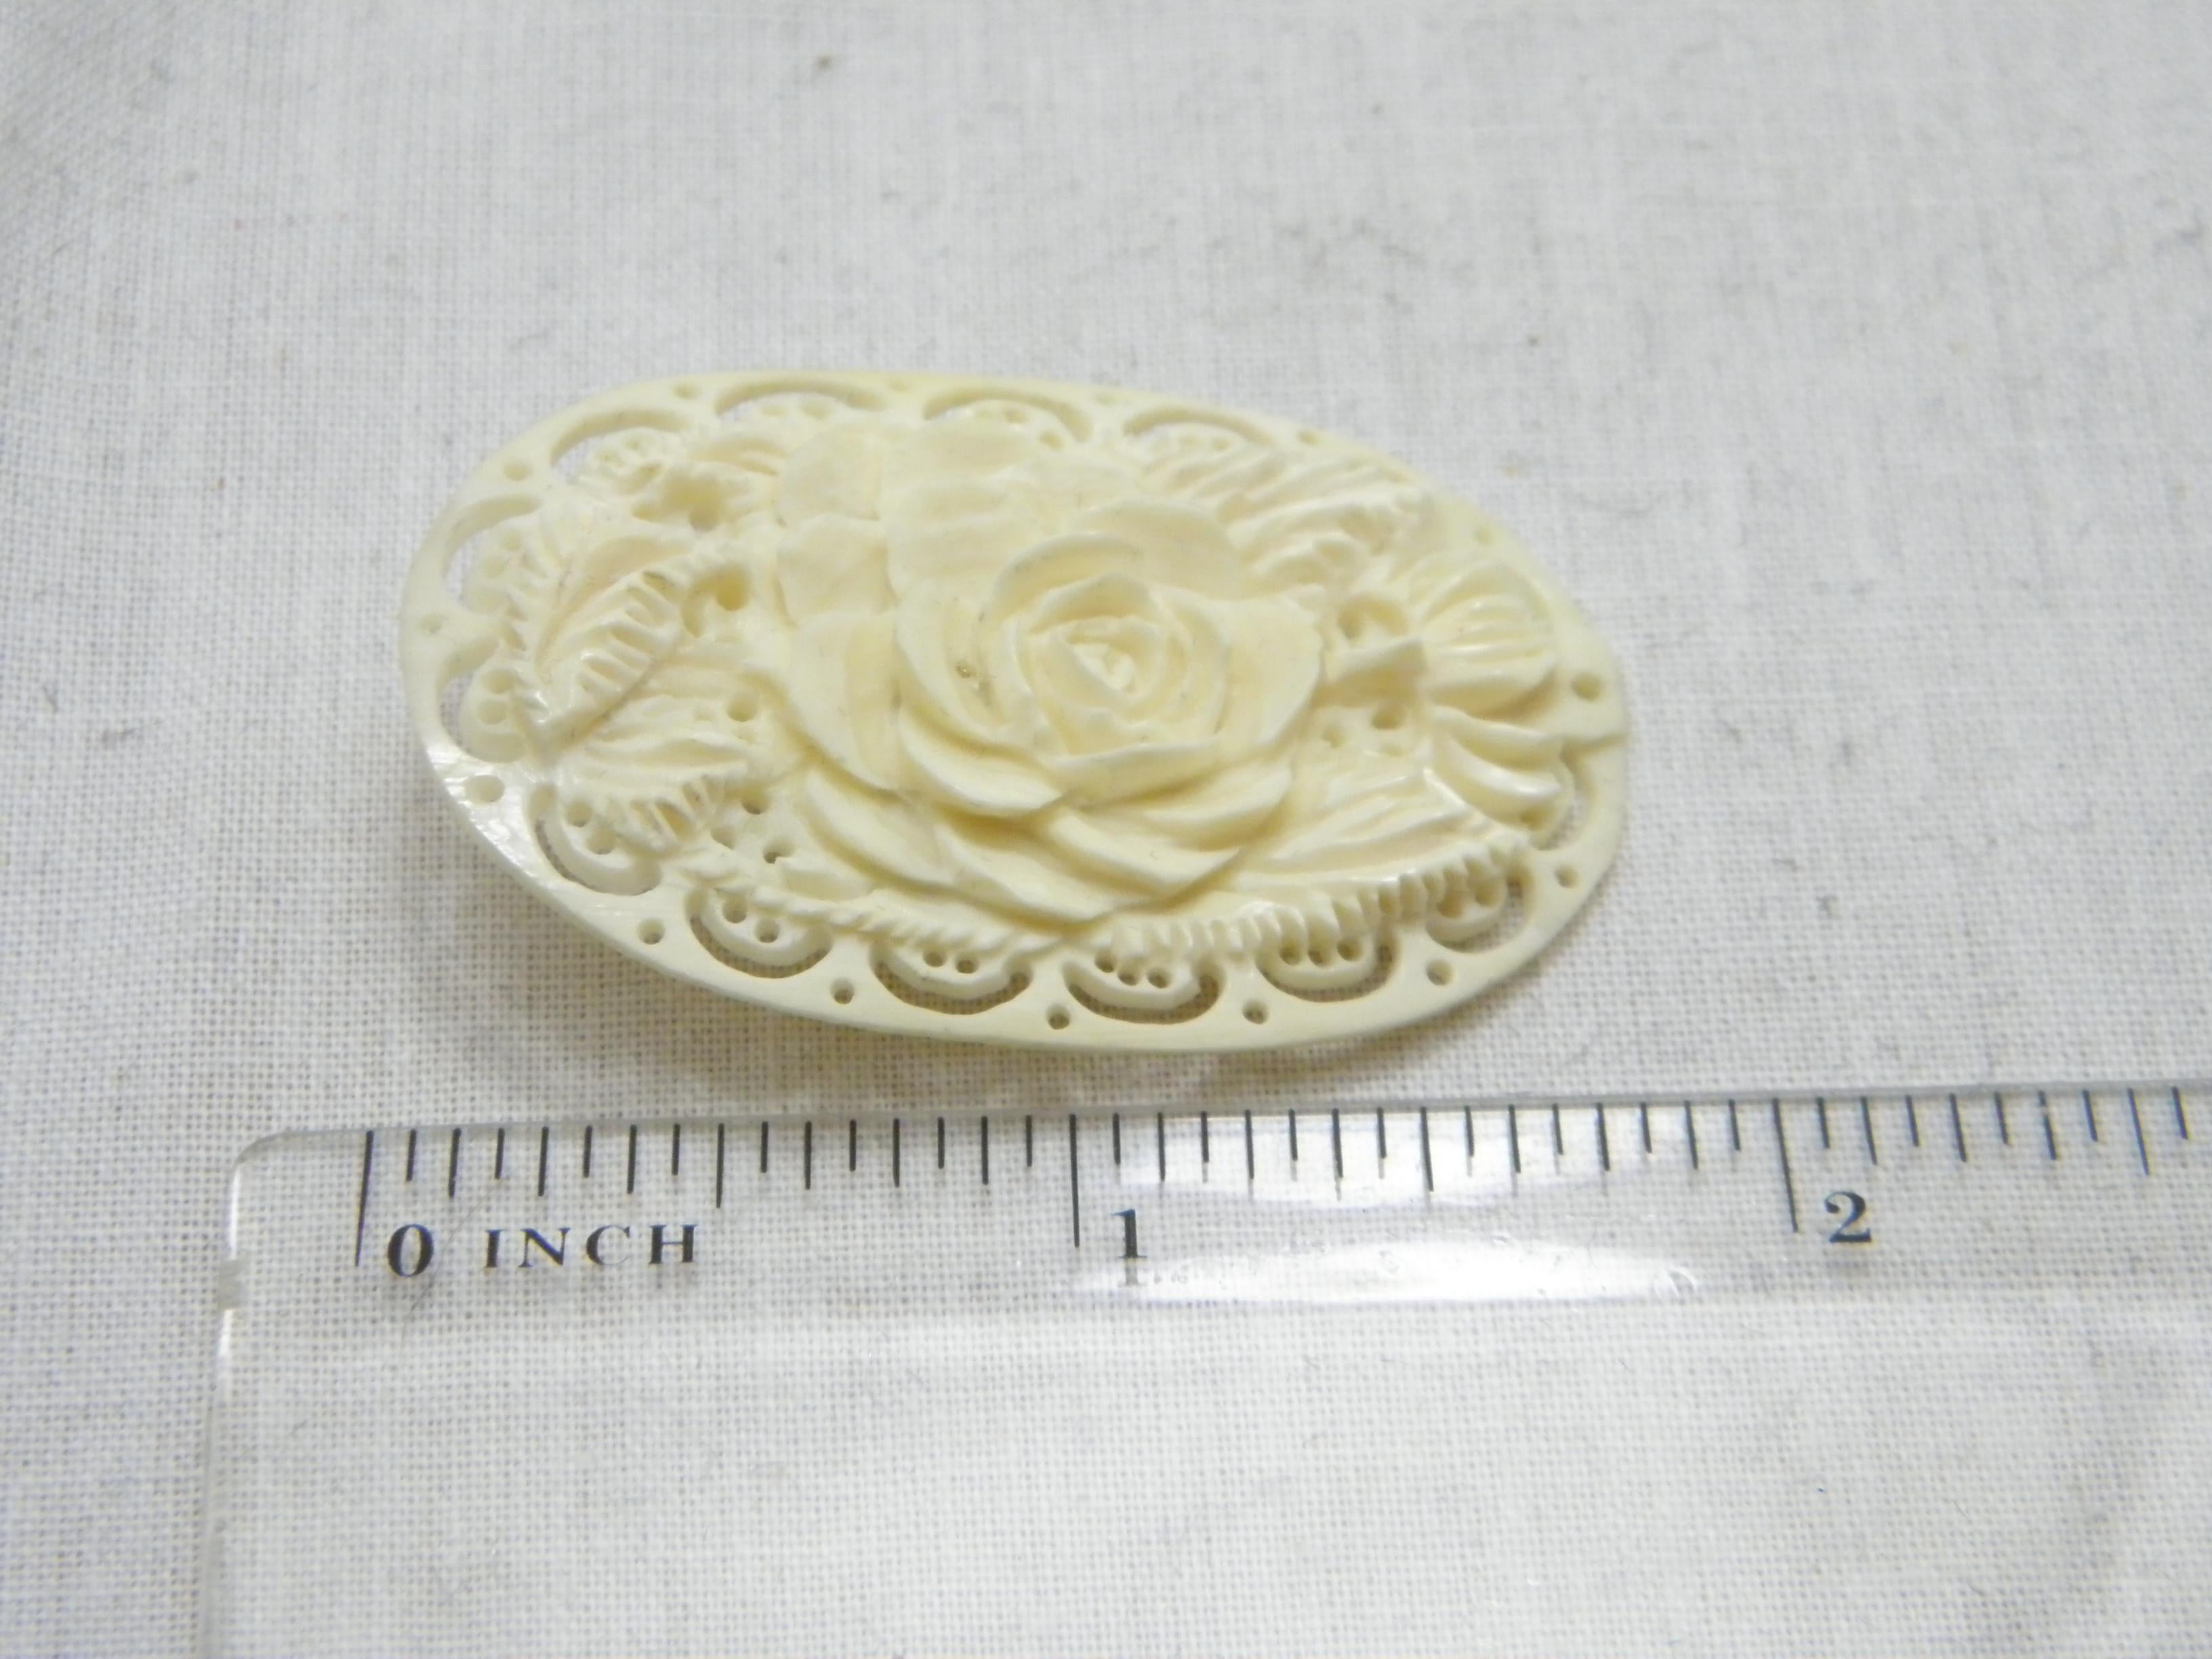 Vintage 9ct Gold Large Carved Bone Rose Brooch Pin c1970s 375 Purity Handmade For Sale 5